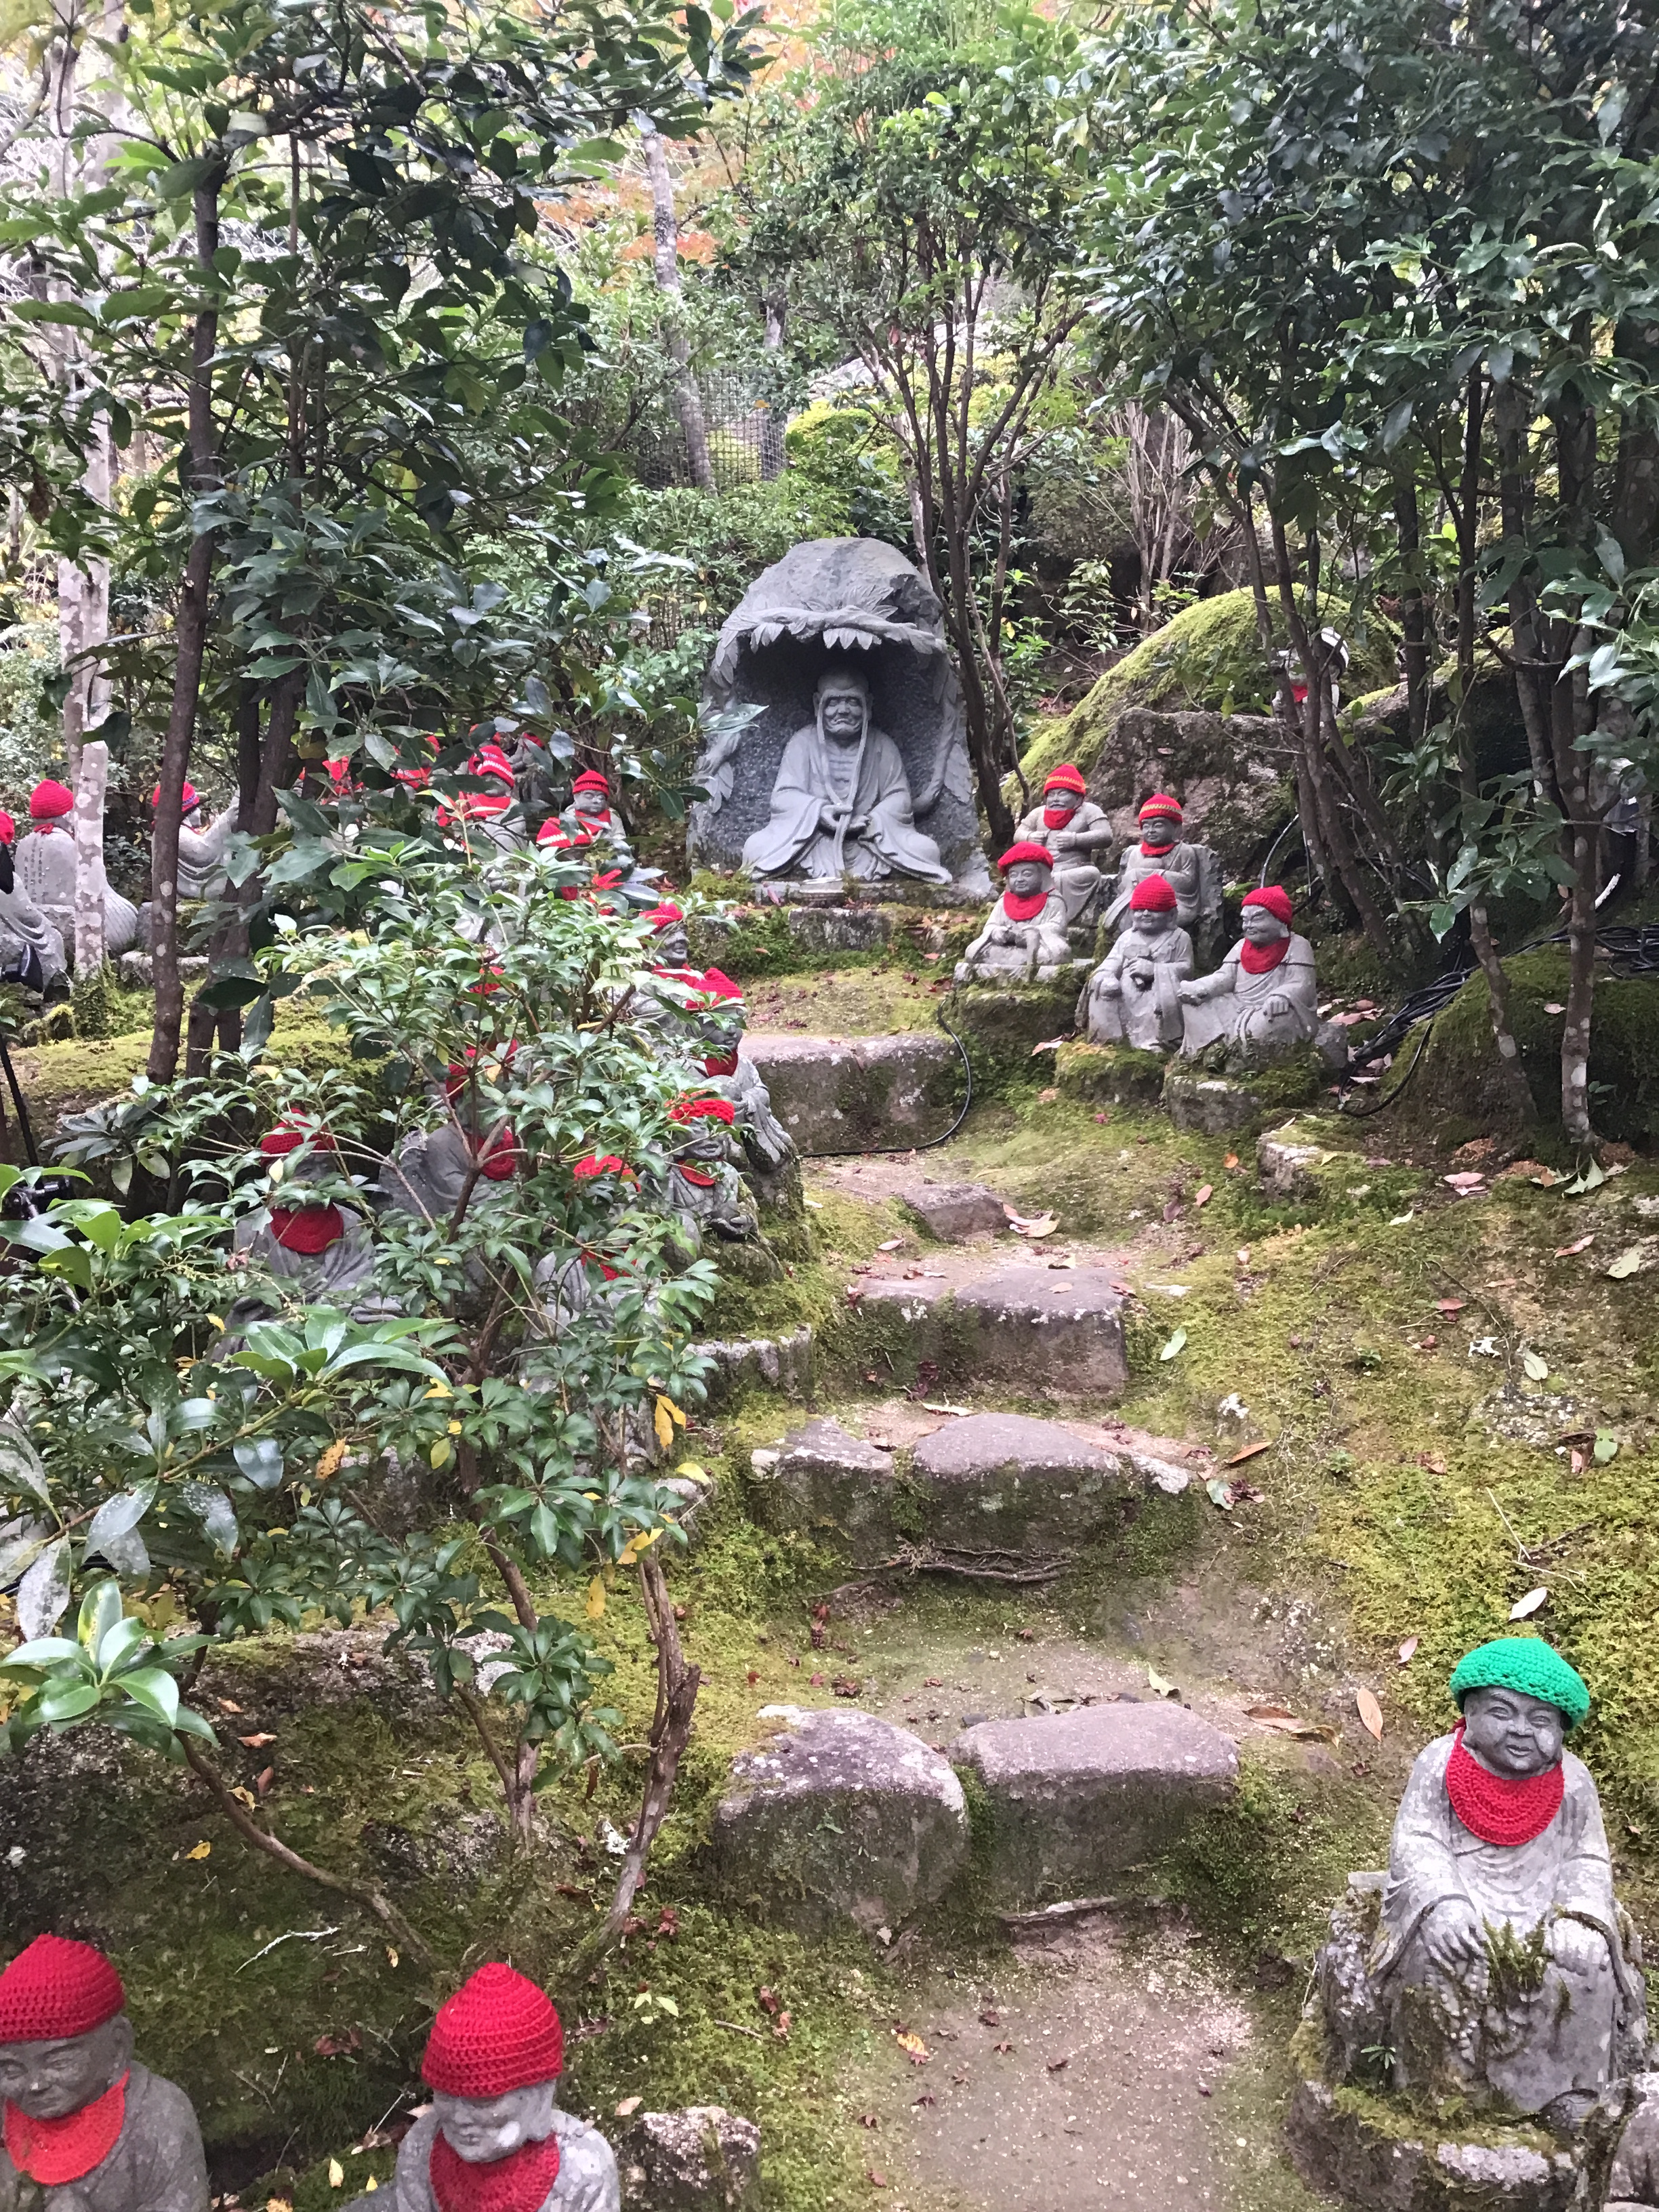 Red hat statues and a larger statue under a shade